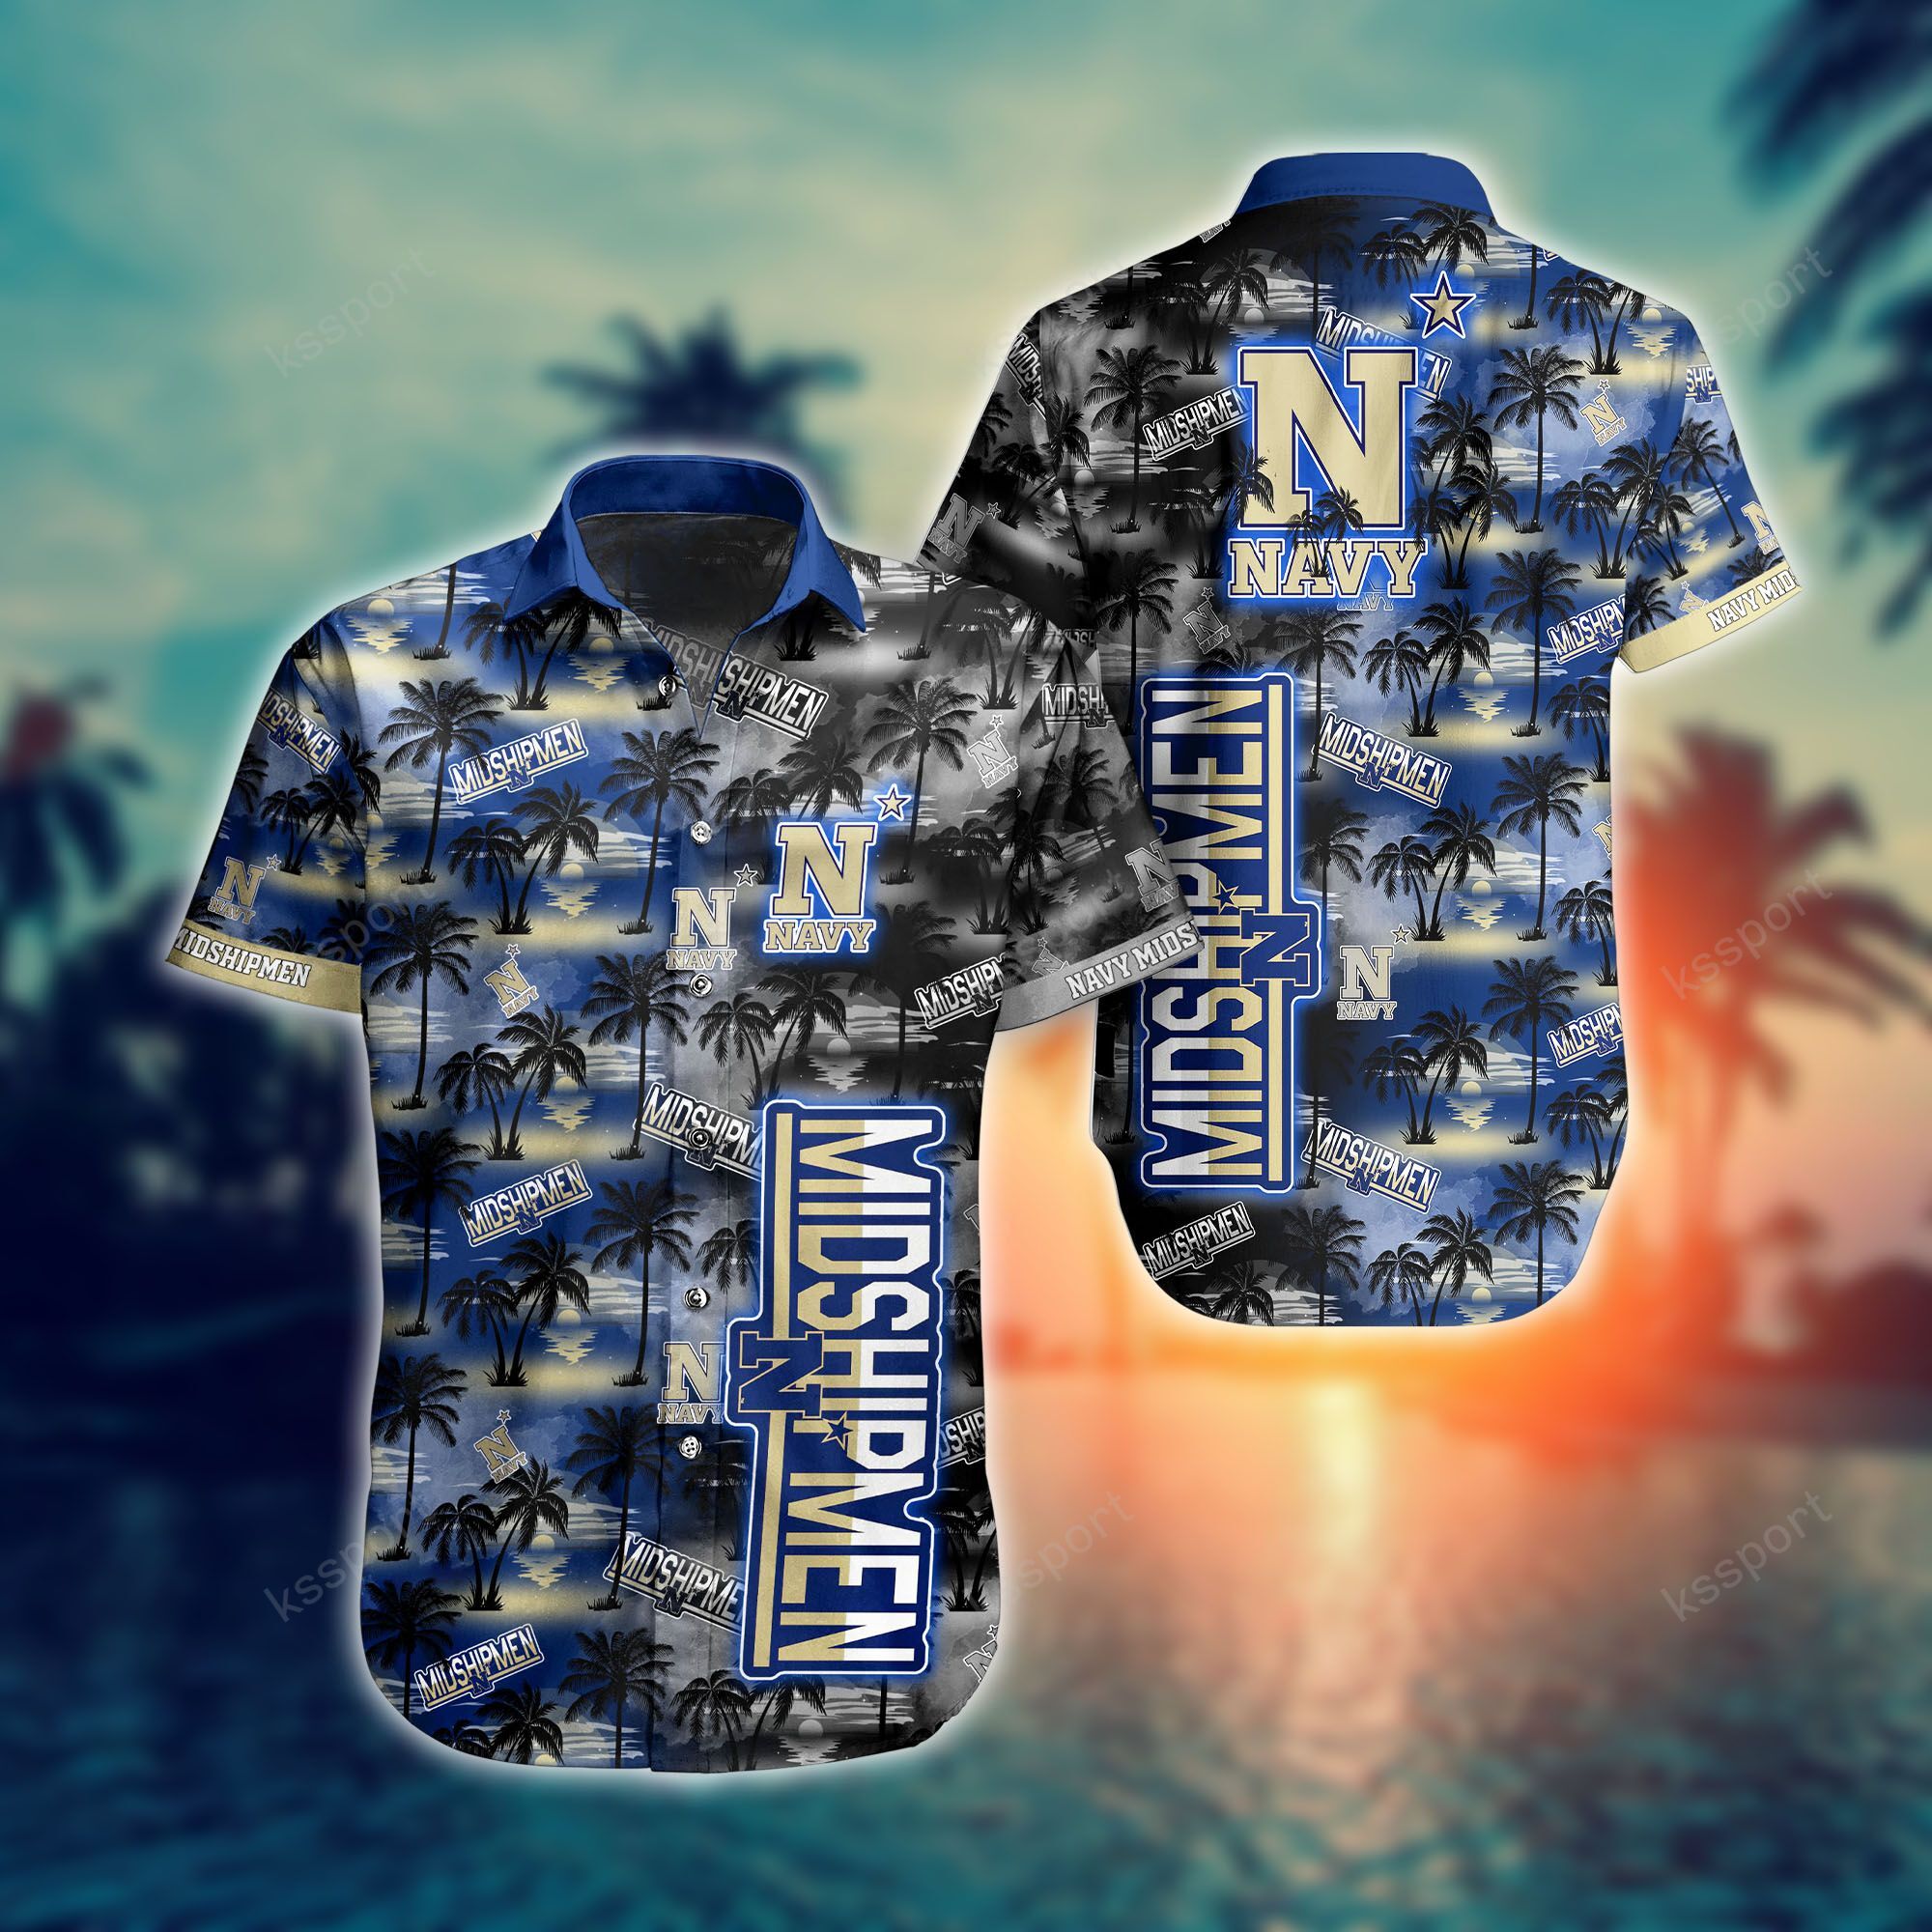 Treat yourself to a cool Hawaiian set today! 41